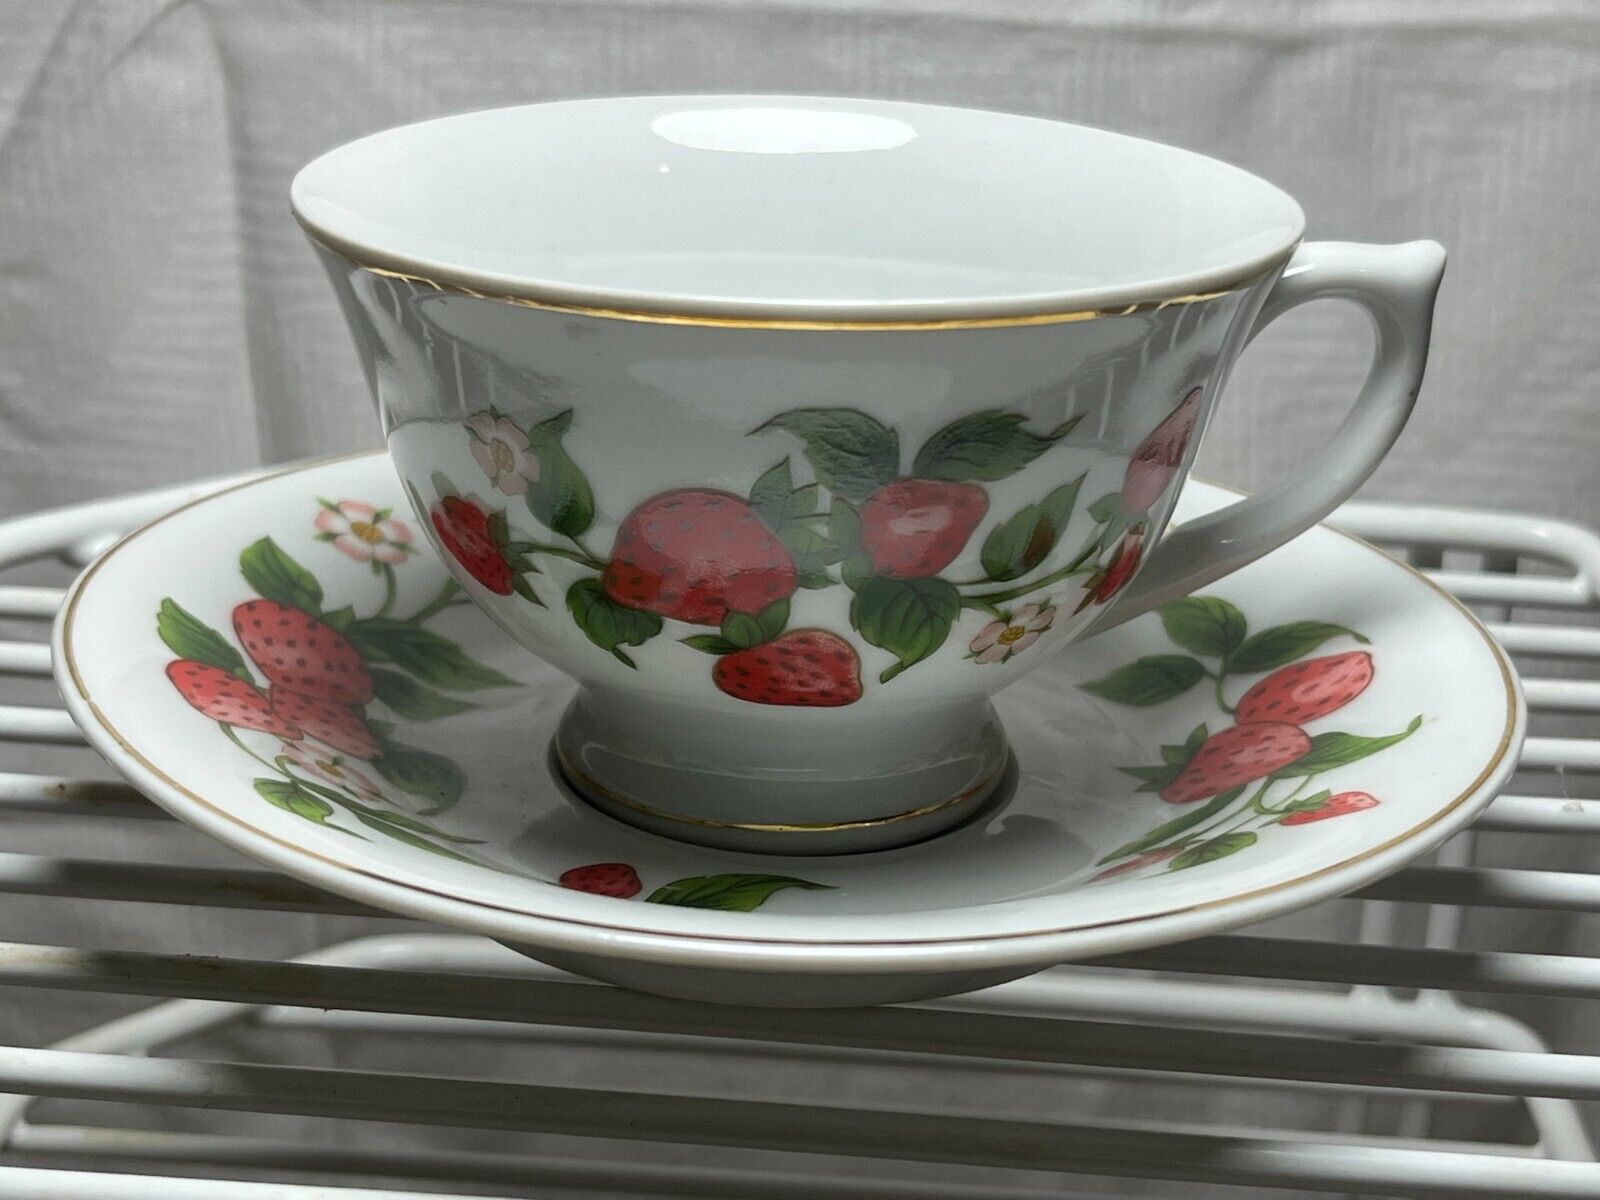 One (1) Teleflora Strawberry Flower Tea Cup and Saucer